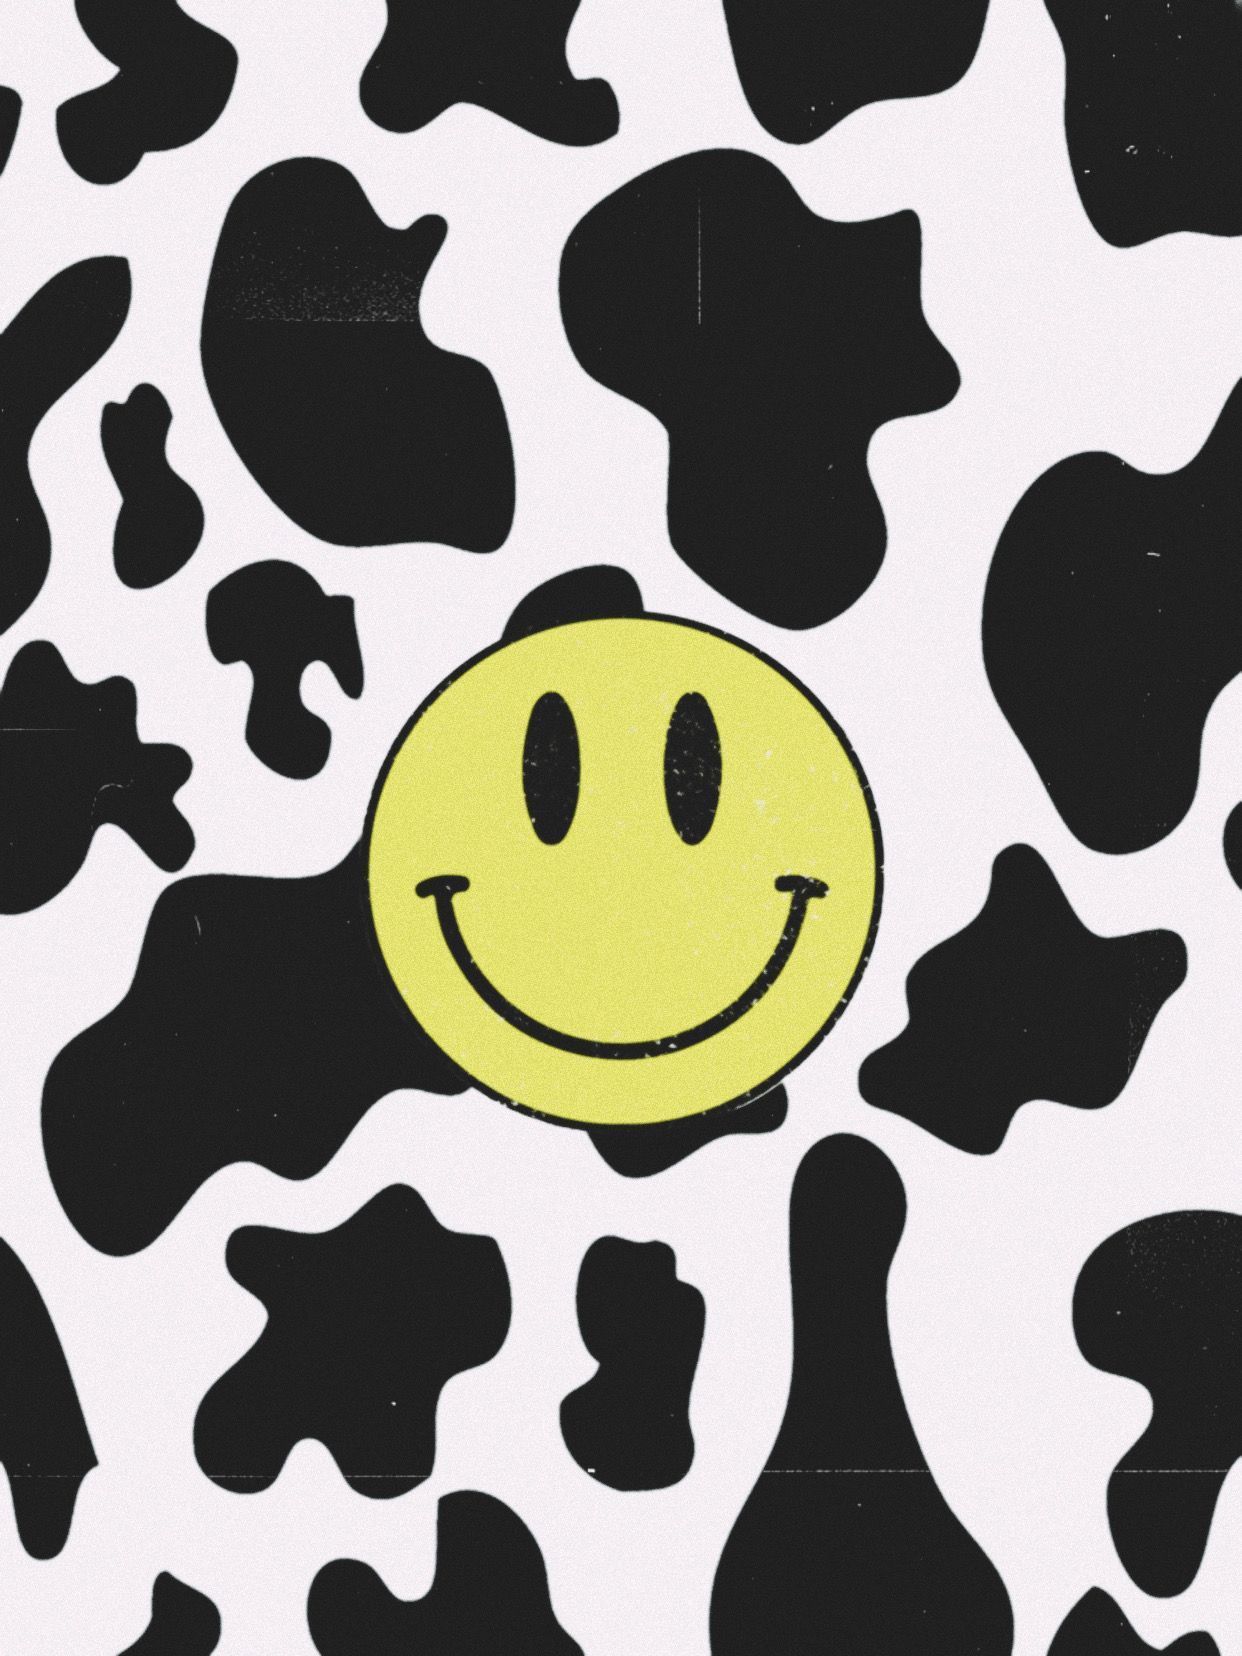 A smiling face on a cow print background - Smiley